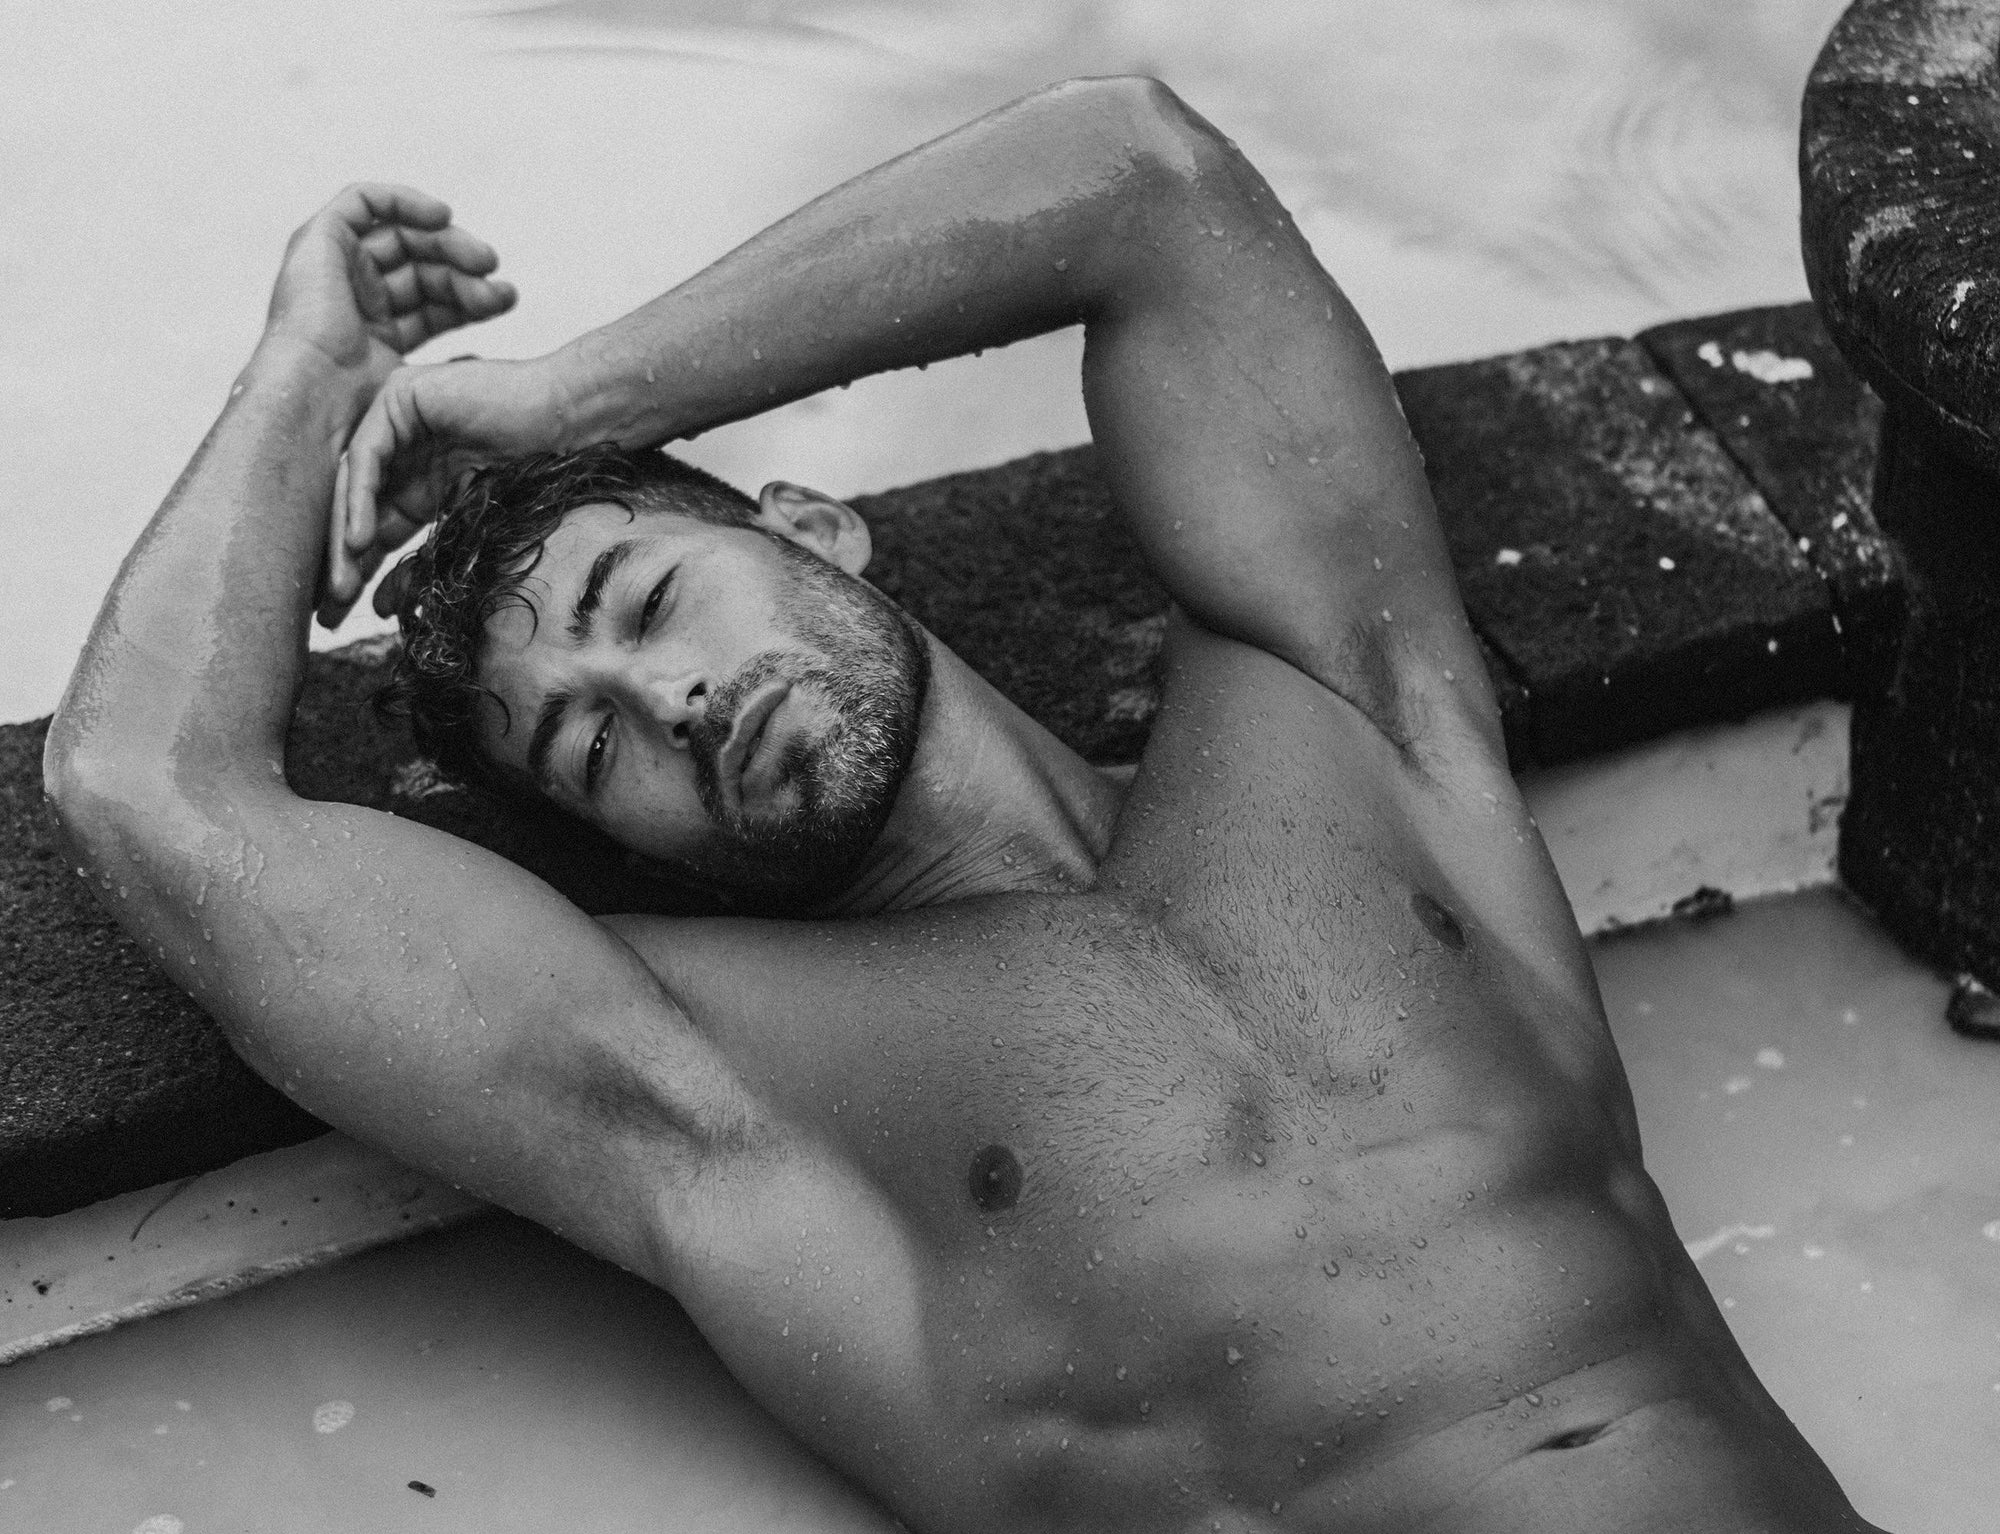 Brazilian-Portuguese actor, model, and performer Igor Amanajás now living in Bali for his P.h.D. studies in Balinese Dance and drama unveils his yummyiest side